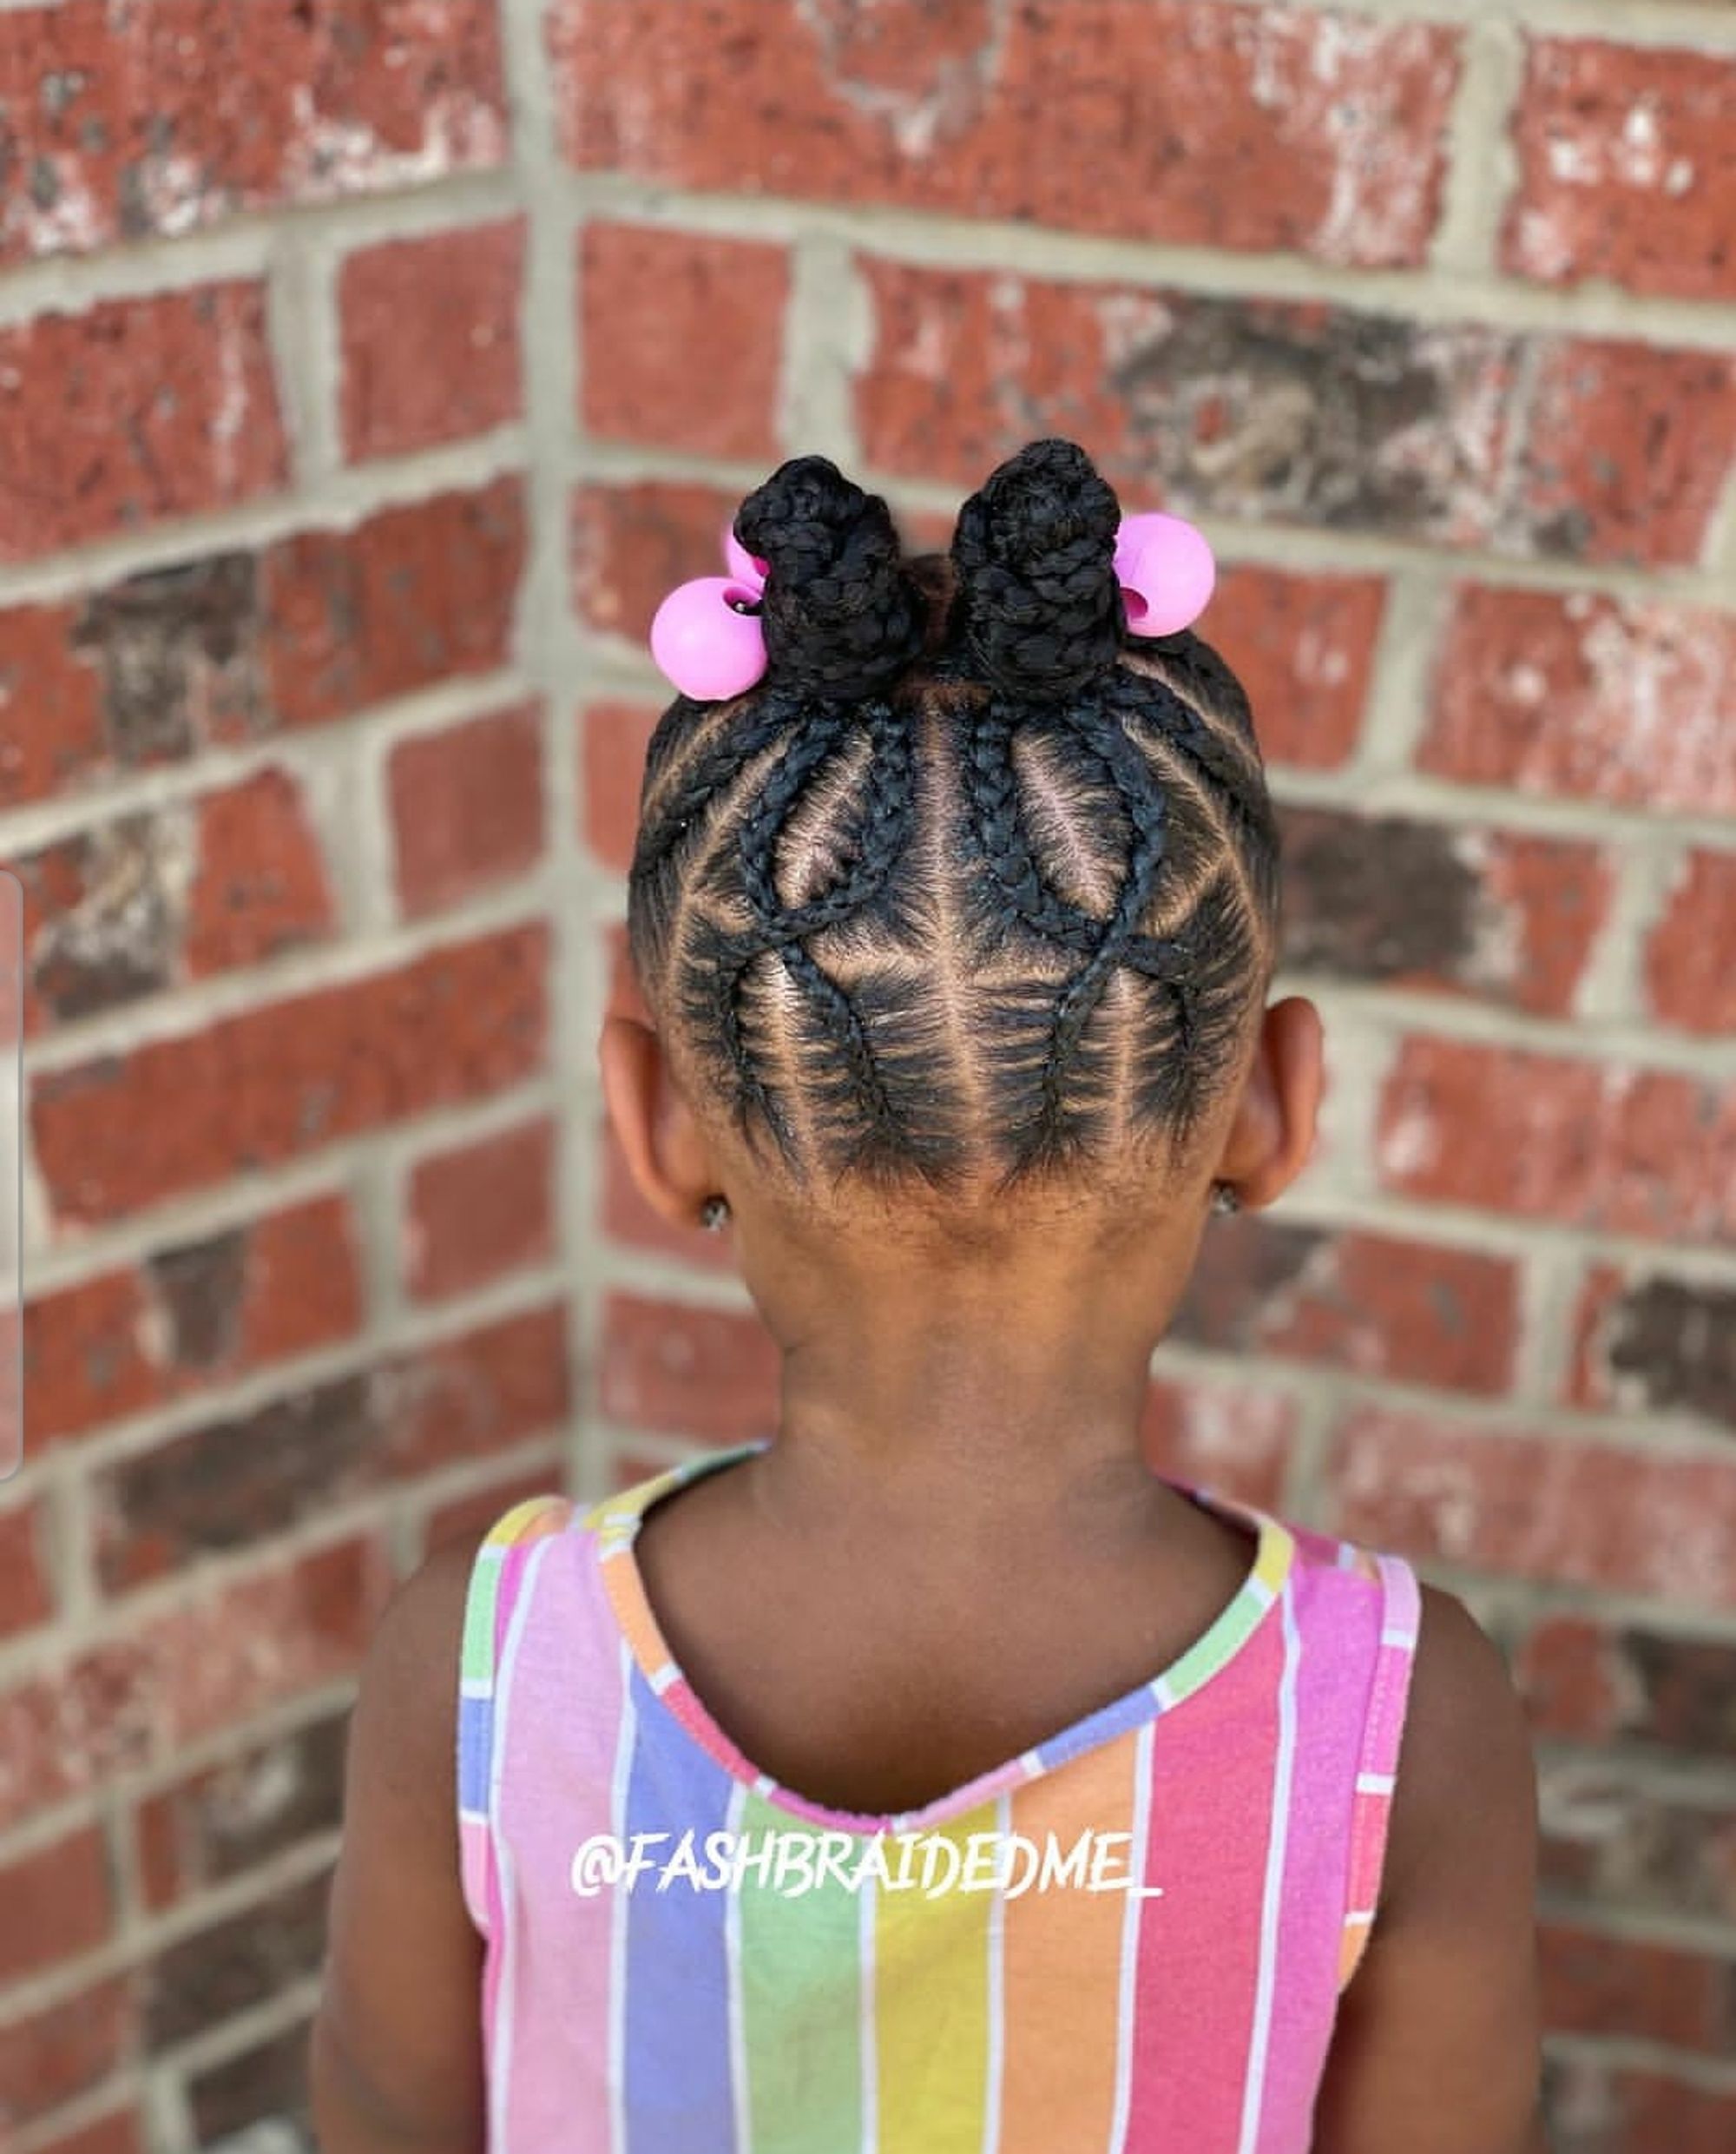 braid hairstyles for kids